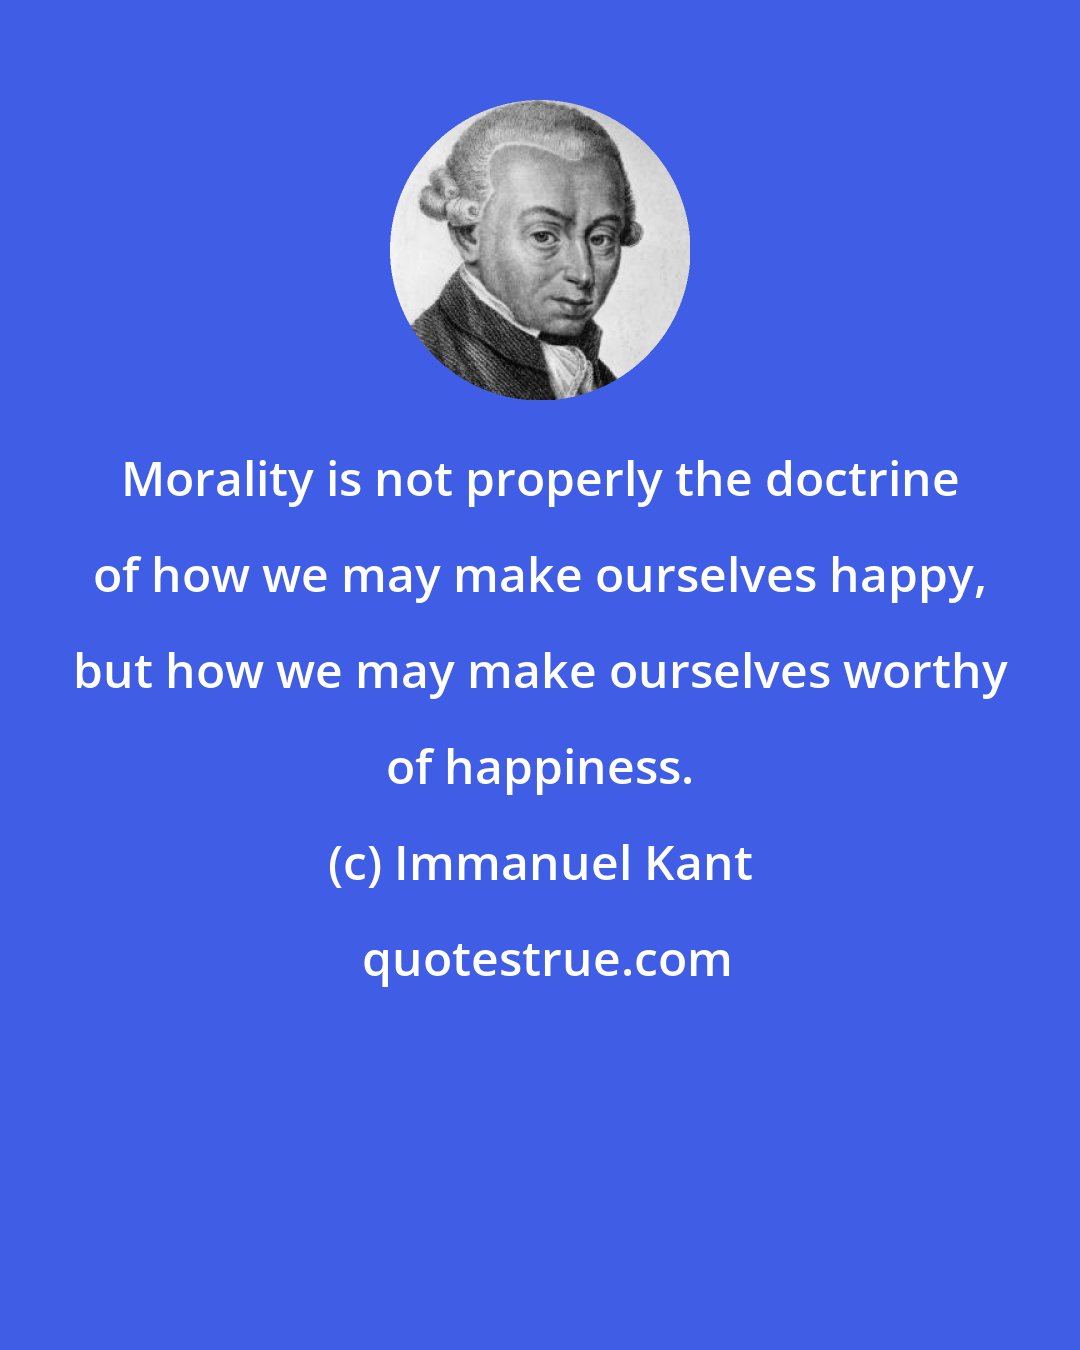 Immanuel Kant: Morality is not properly the doctrine of how we may make ourselves happy, but how we may make ourselves worthy of happiness.